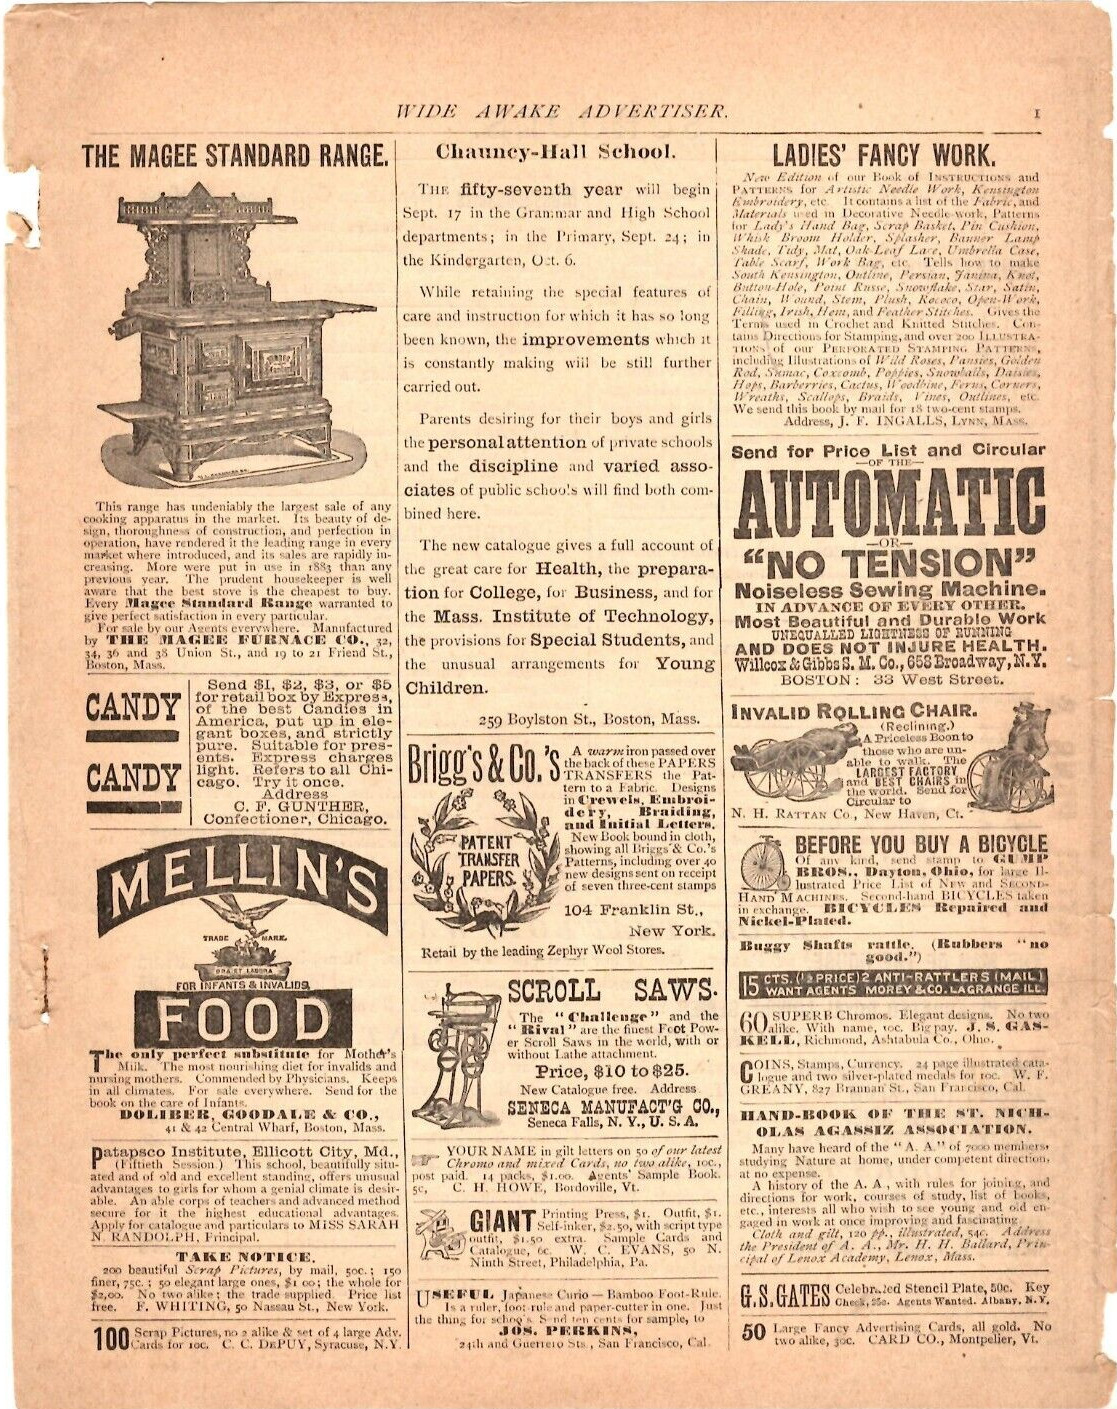 1884 Print Ad The Magee Standard Range /Mellin\'s Food/Invalid Rolling Chair